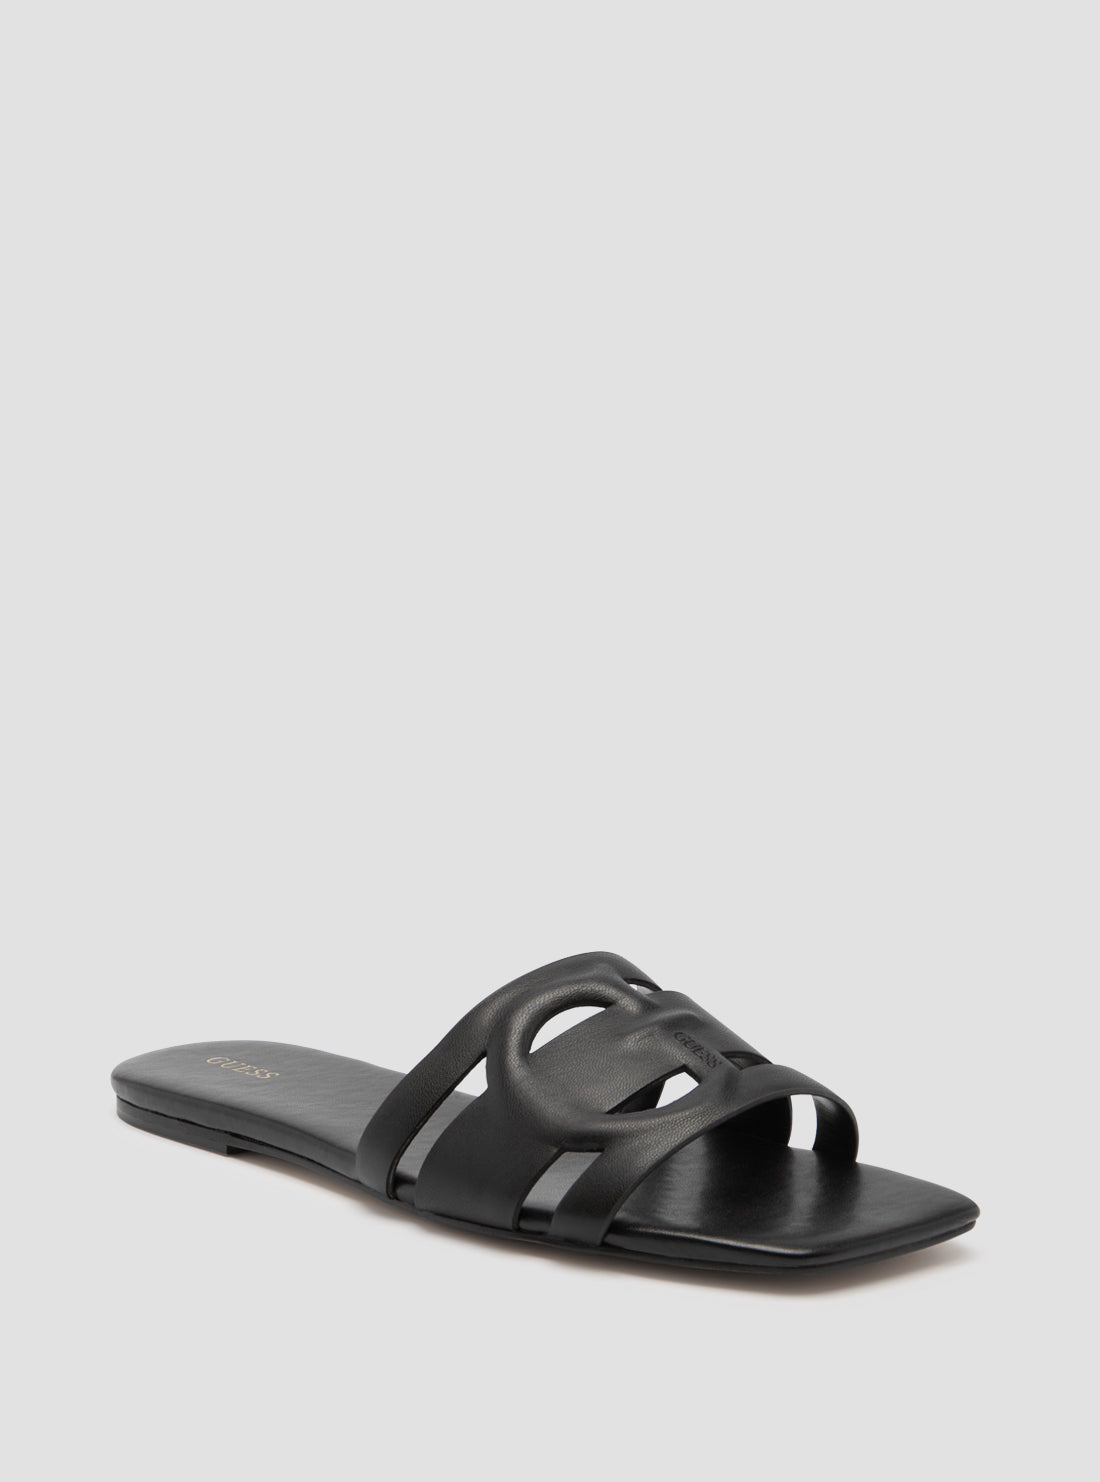 GUESS Women's Black Caffy Sandals CAFFY Front View